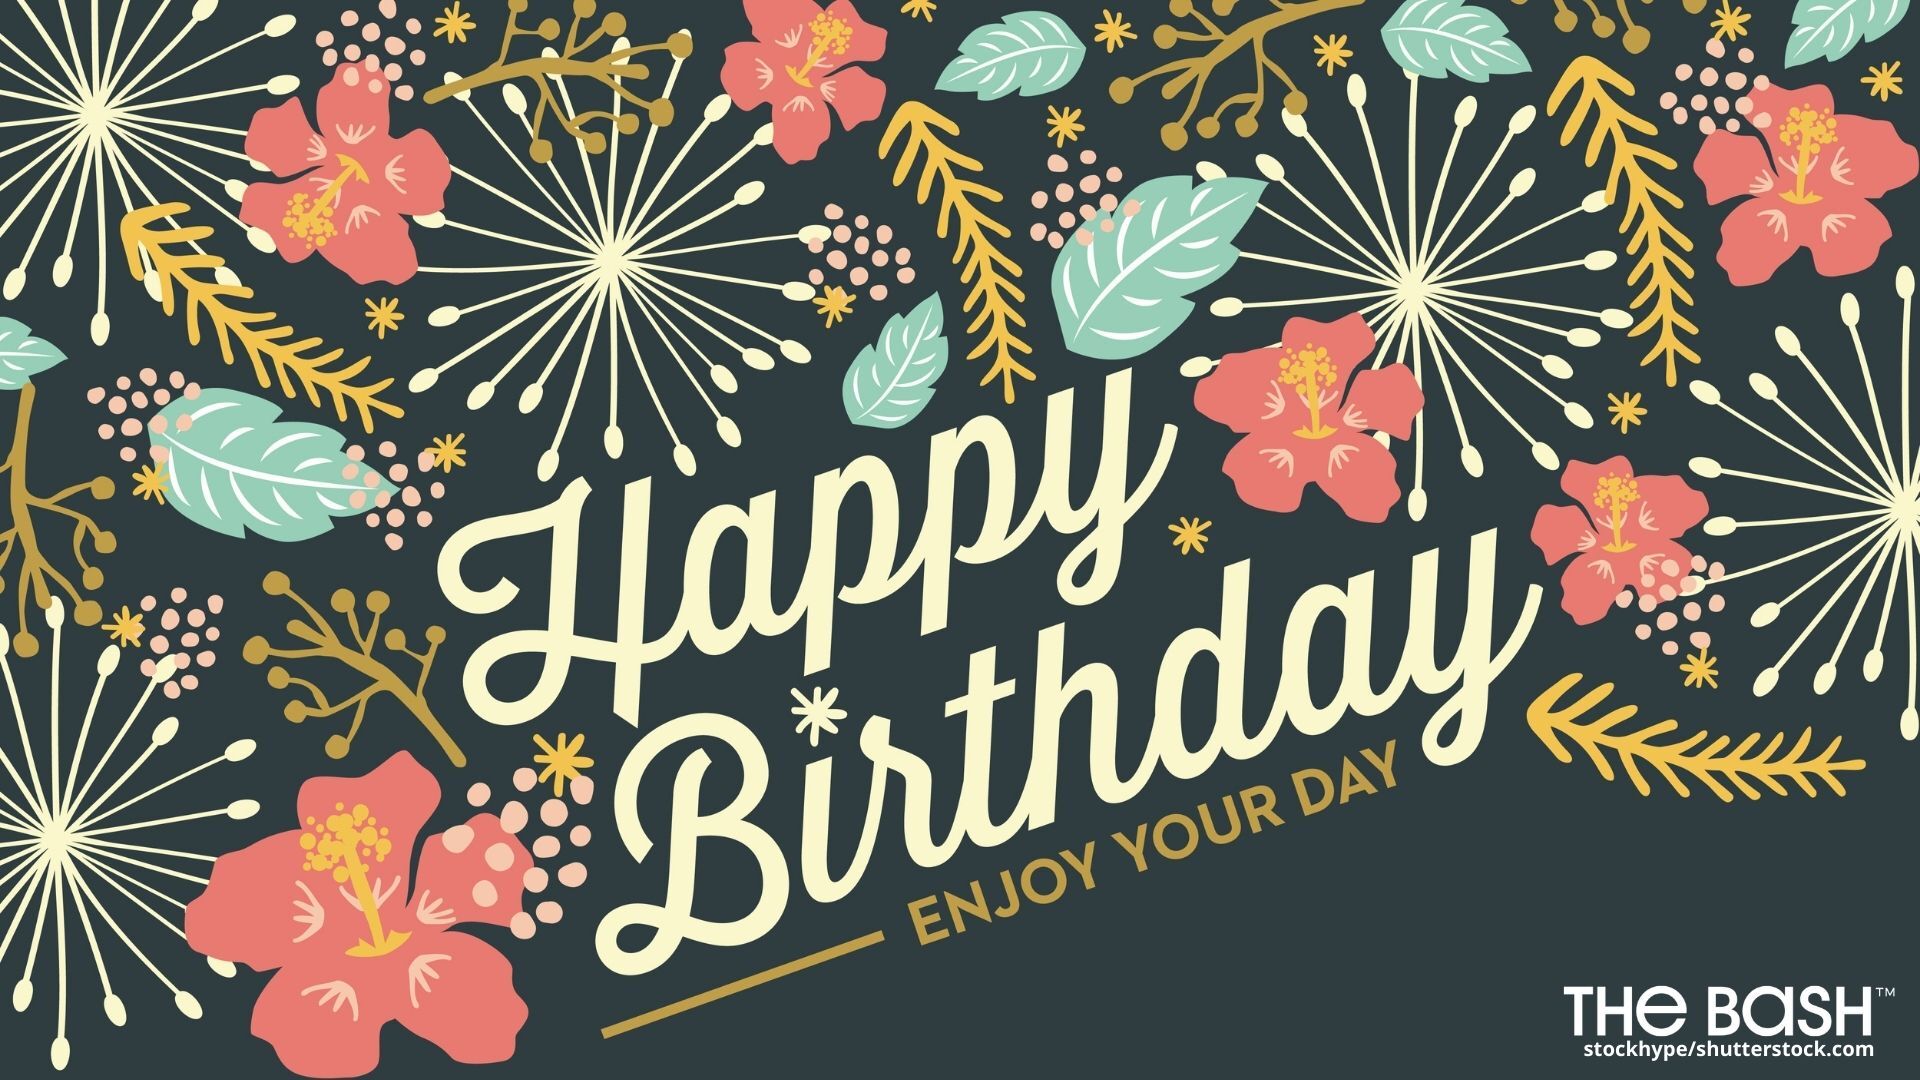 33 Adult's Birthday Zoom Backgrounds - Free Download - The Bash